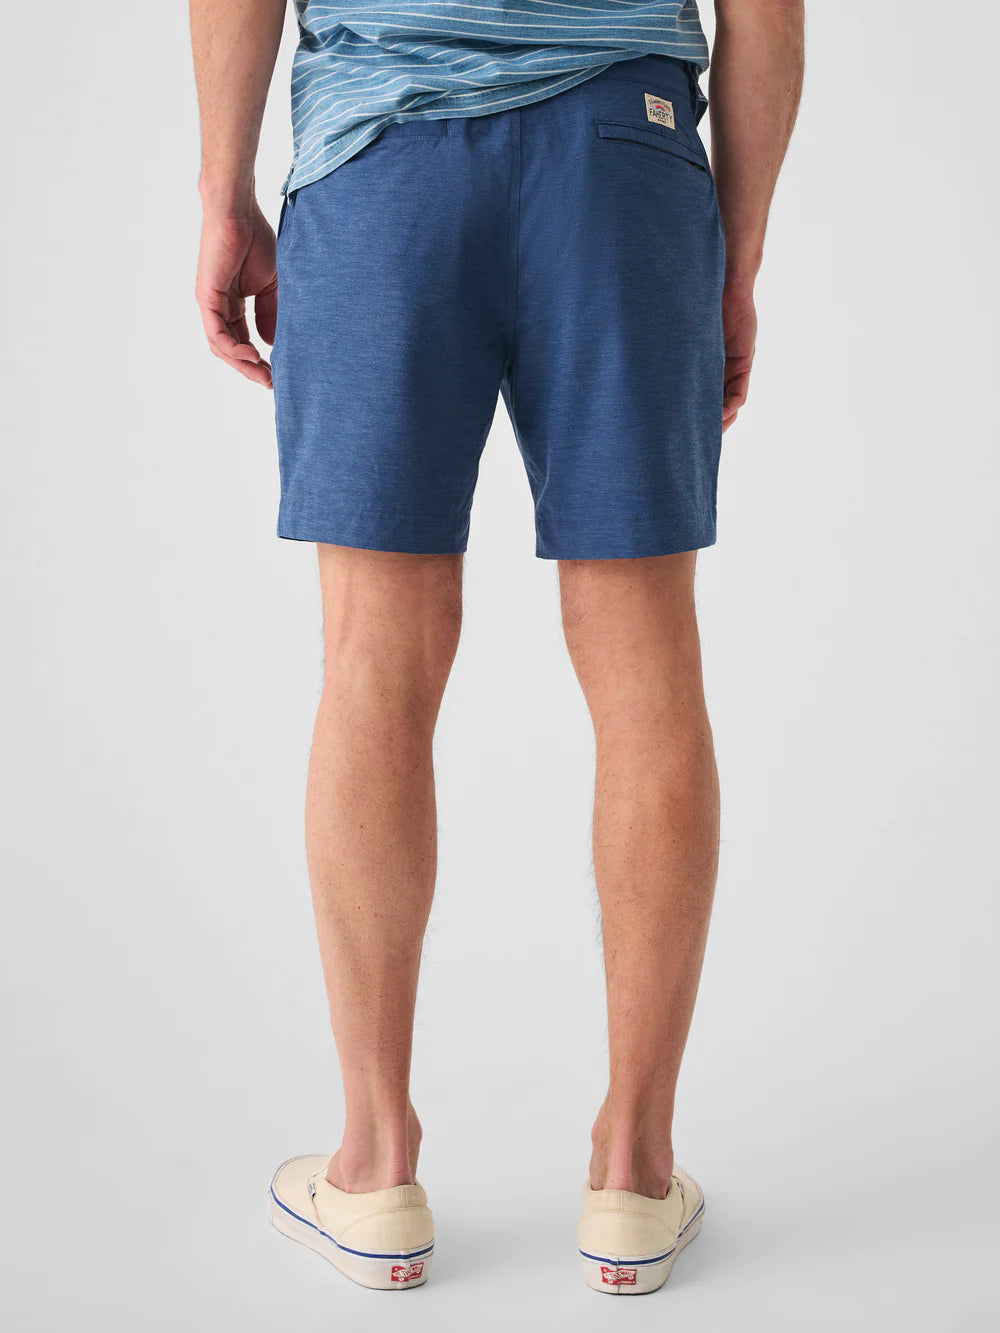 All Day Shorts (7" Inseam)